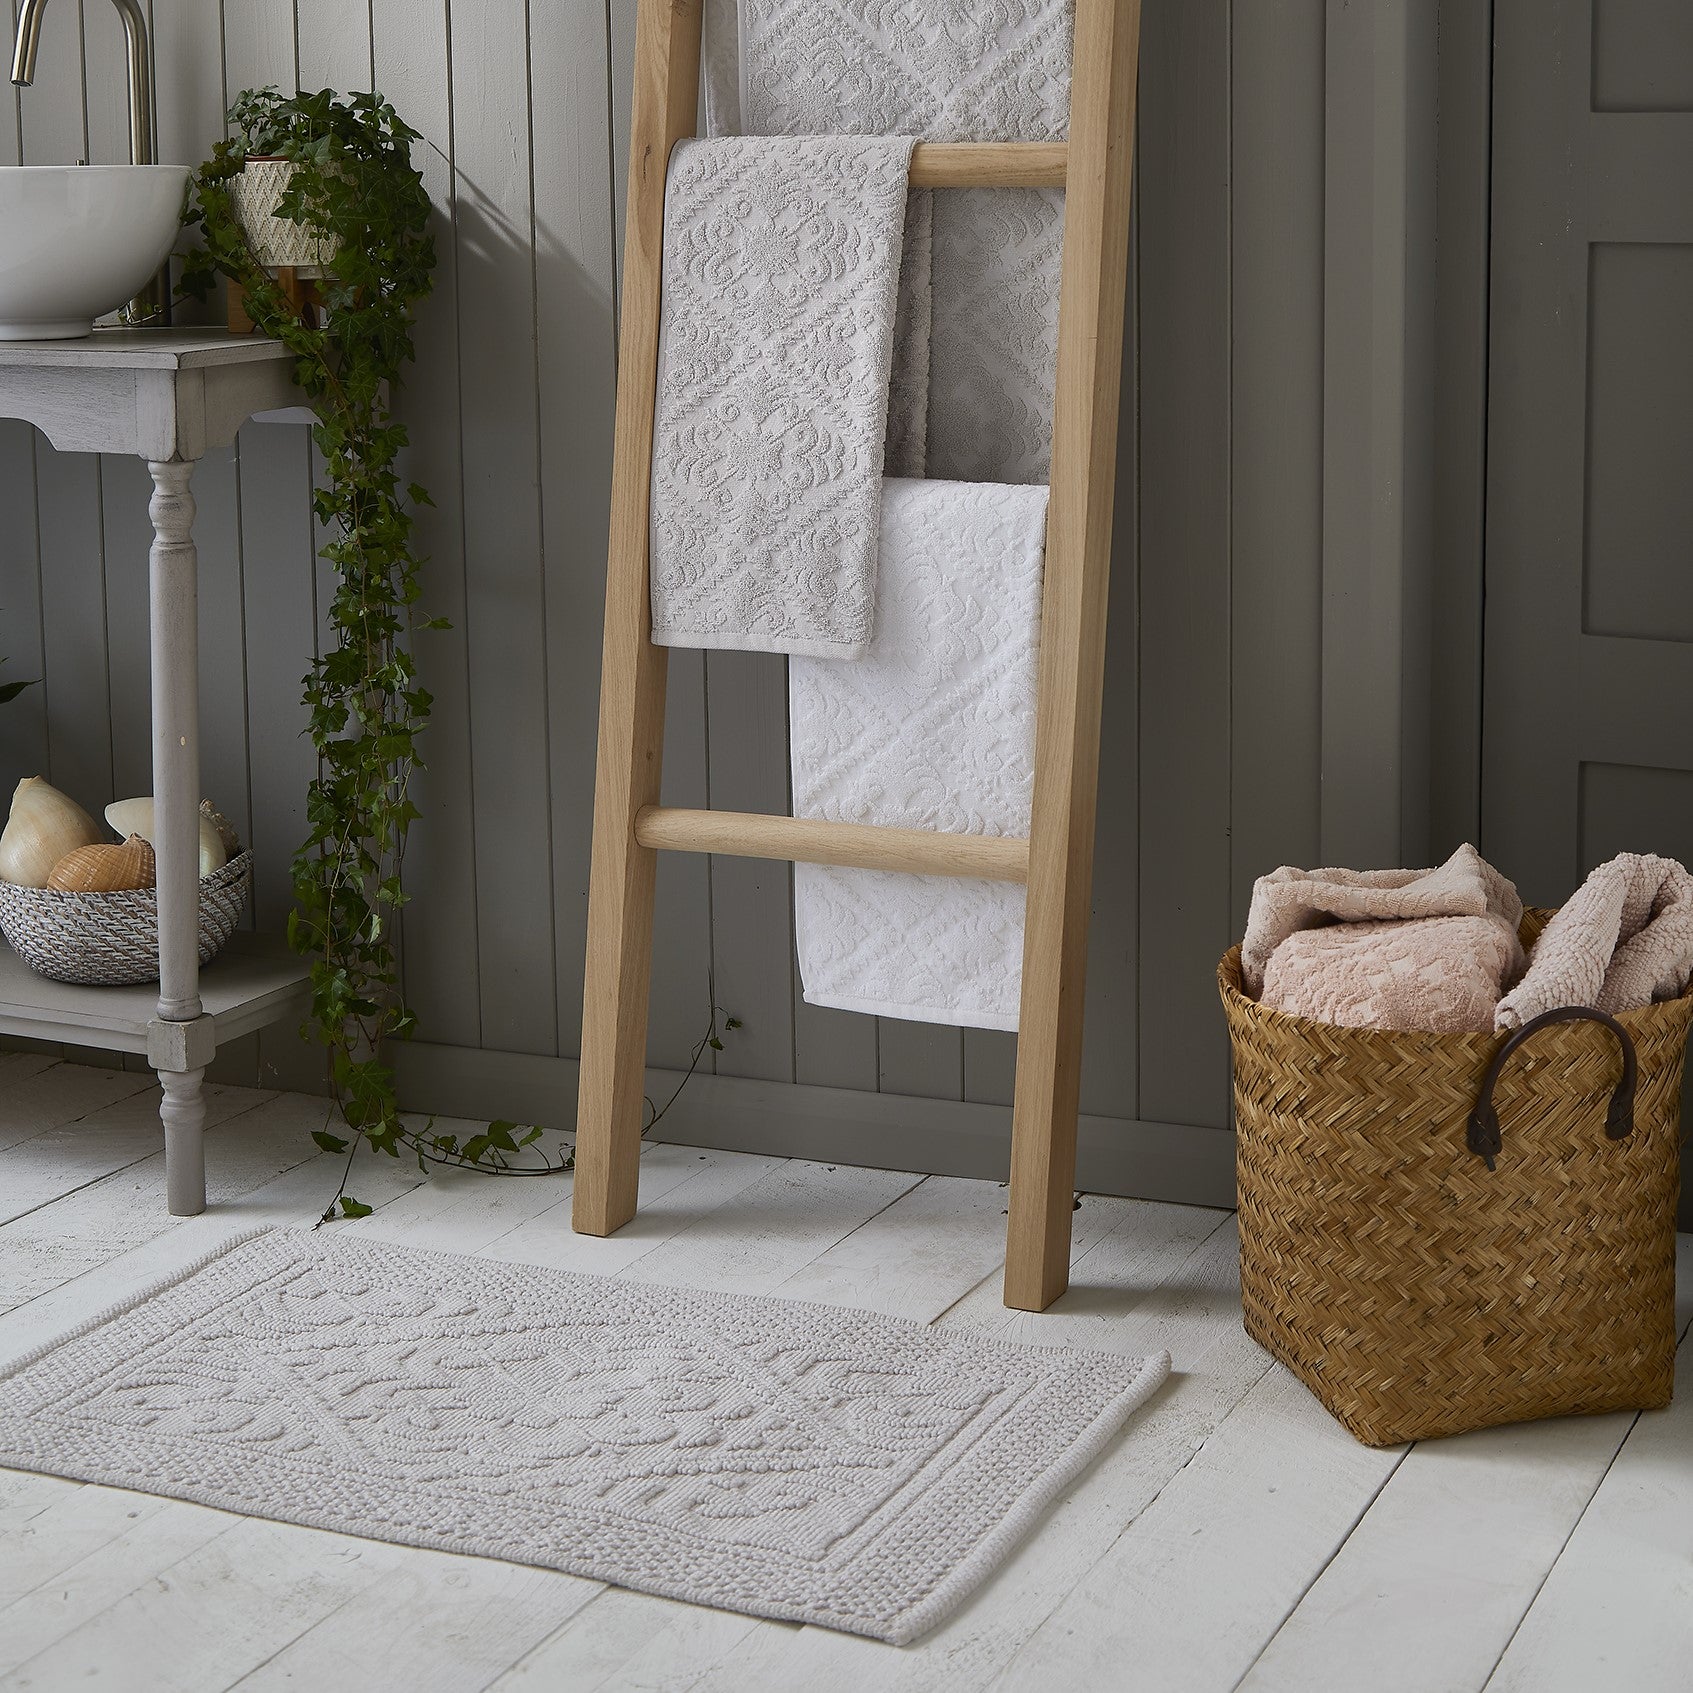 vintage bath mat and towels in matching style